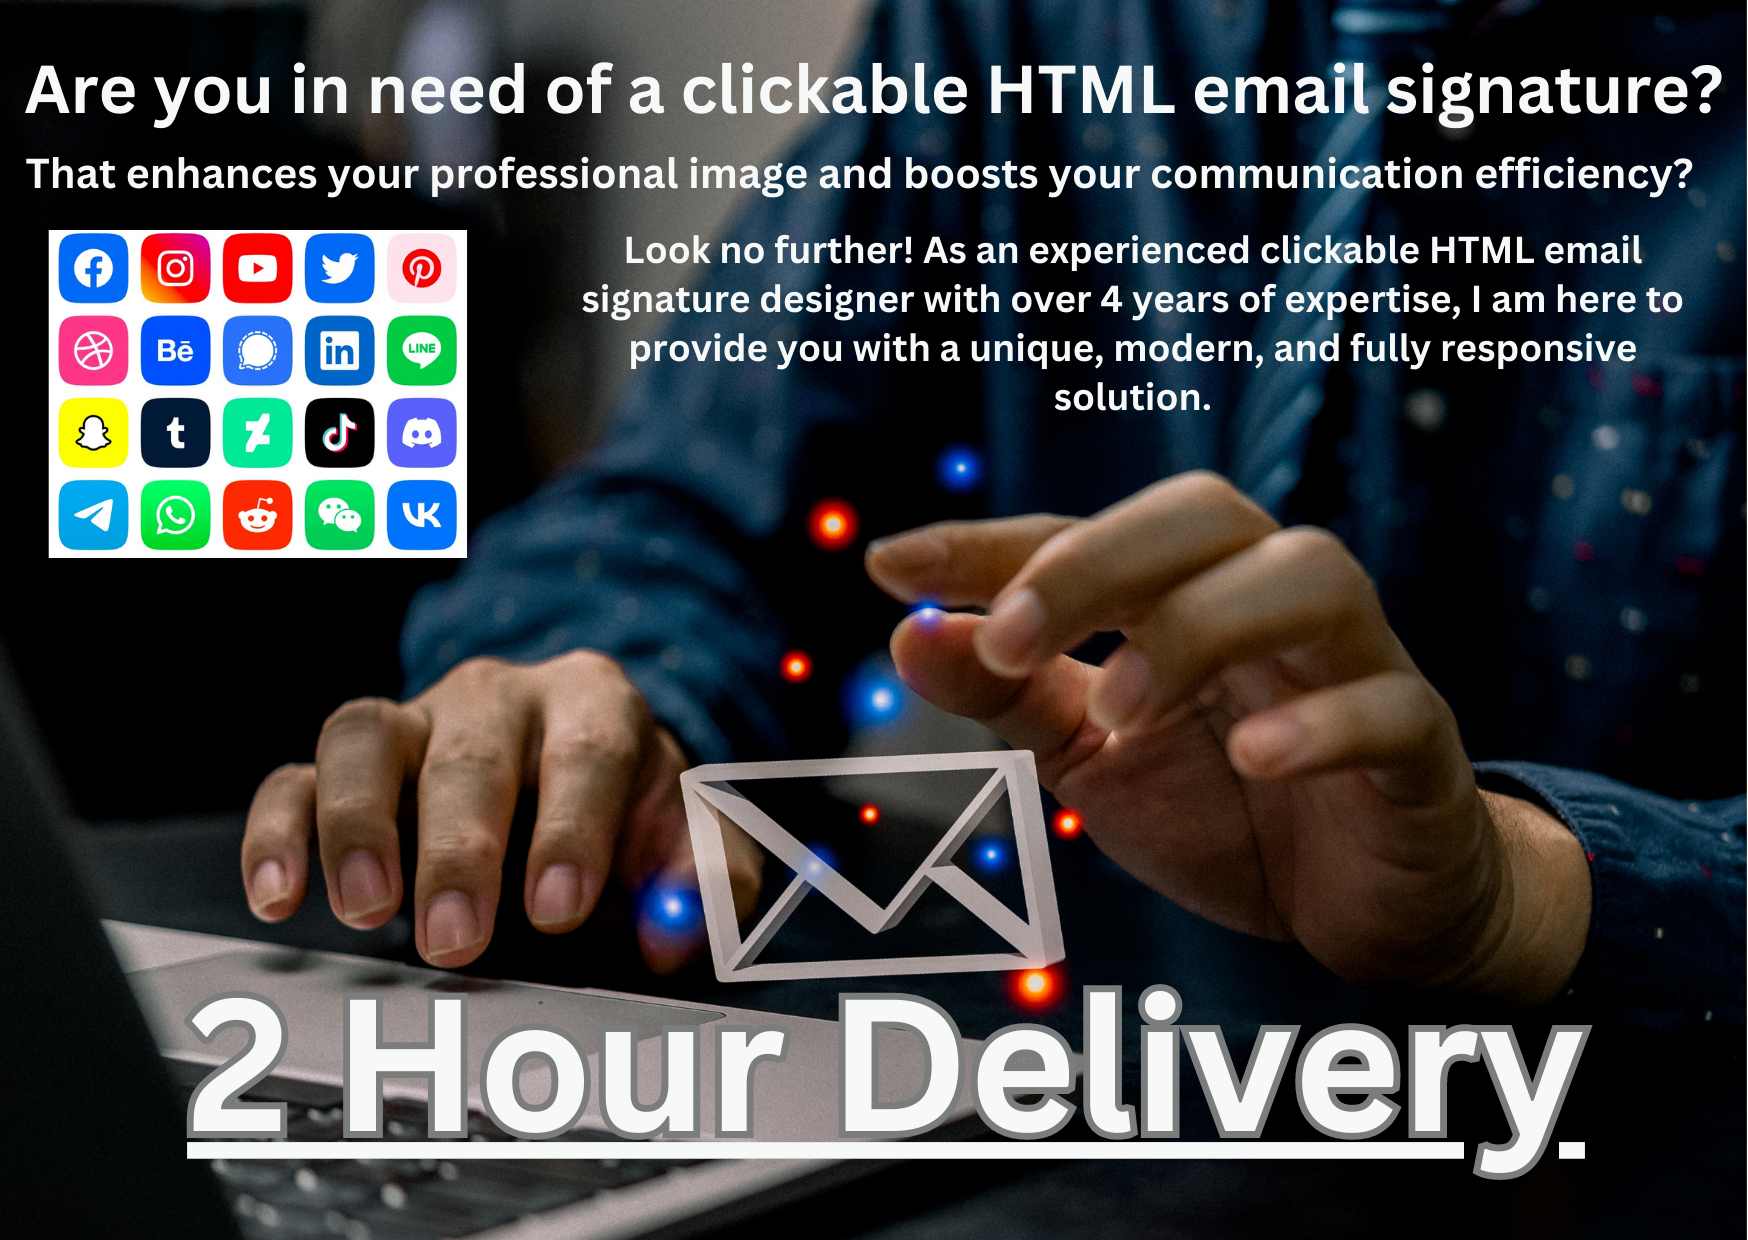 I will provide a clickable HTML email signature to enhance professional image